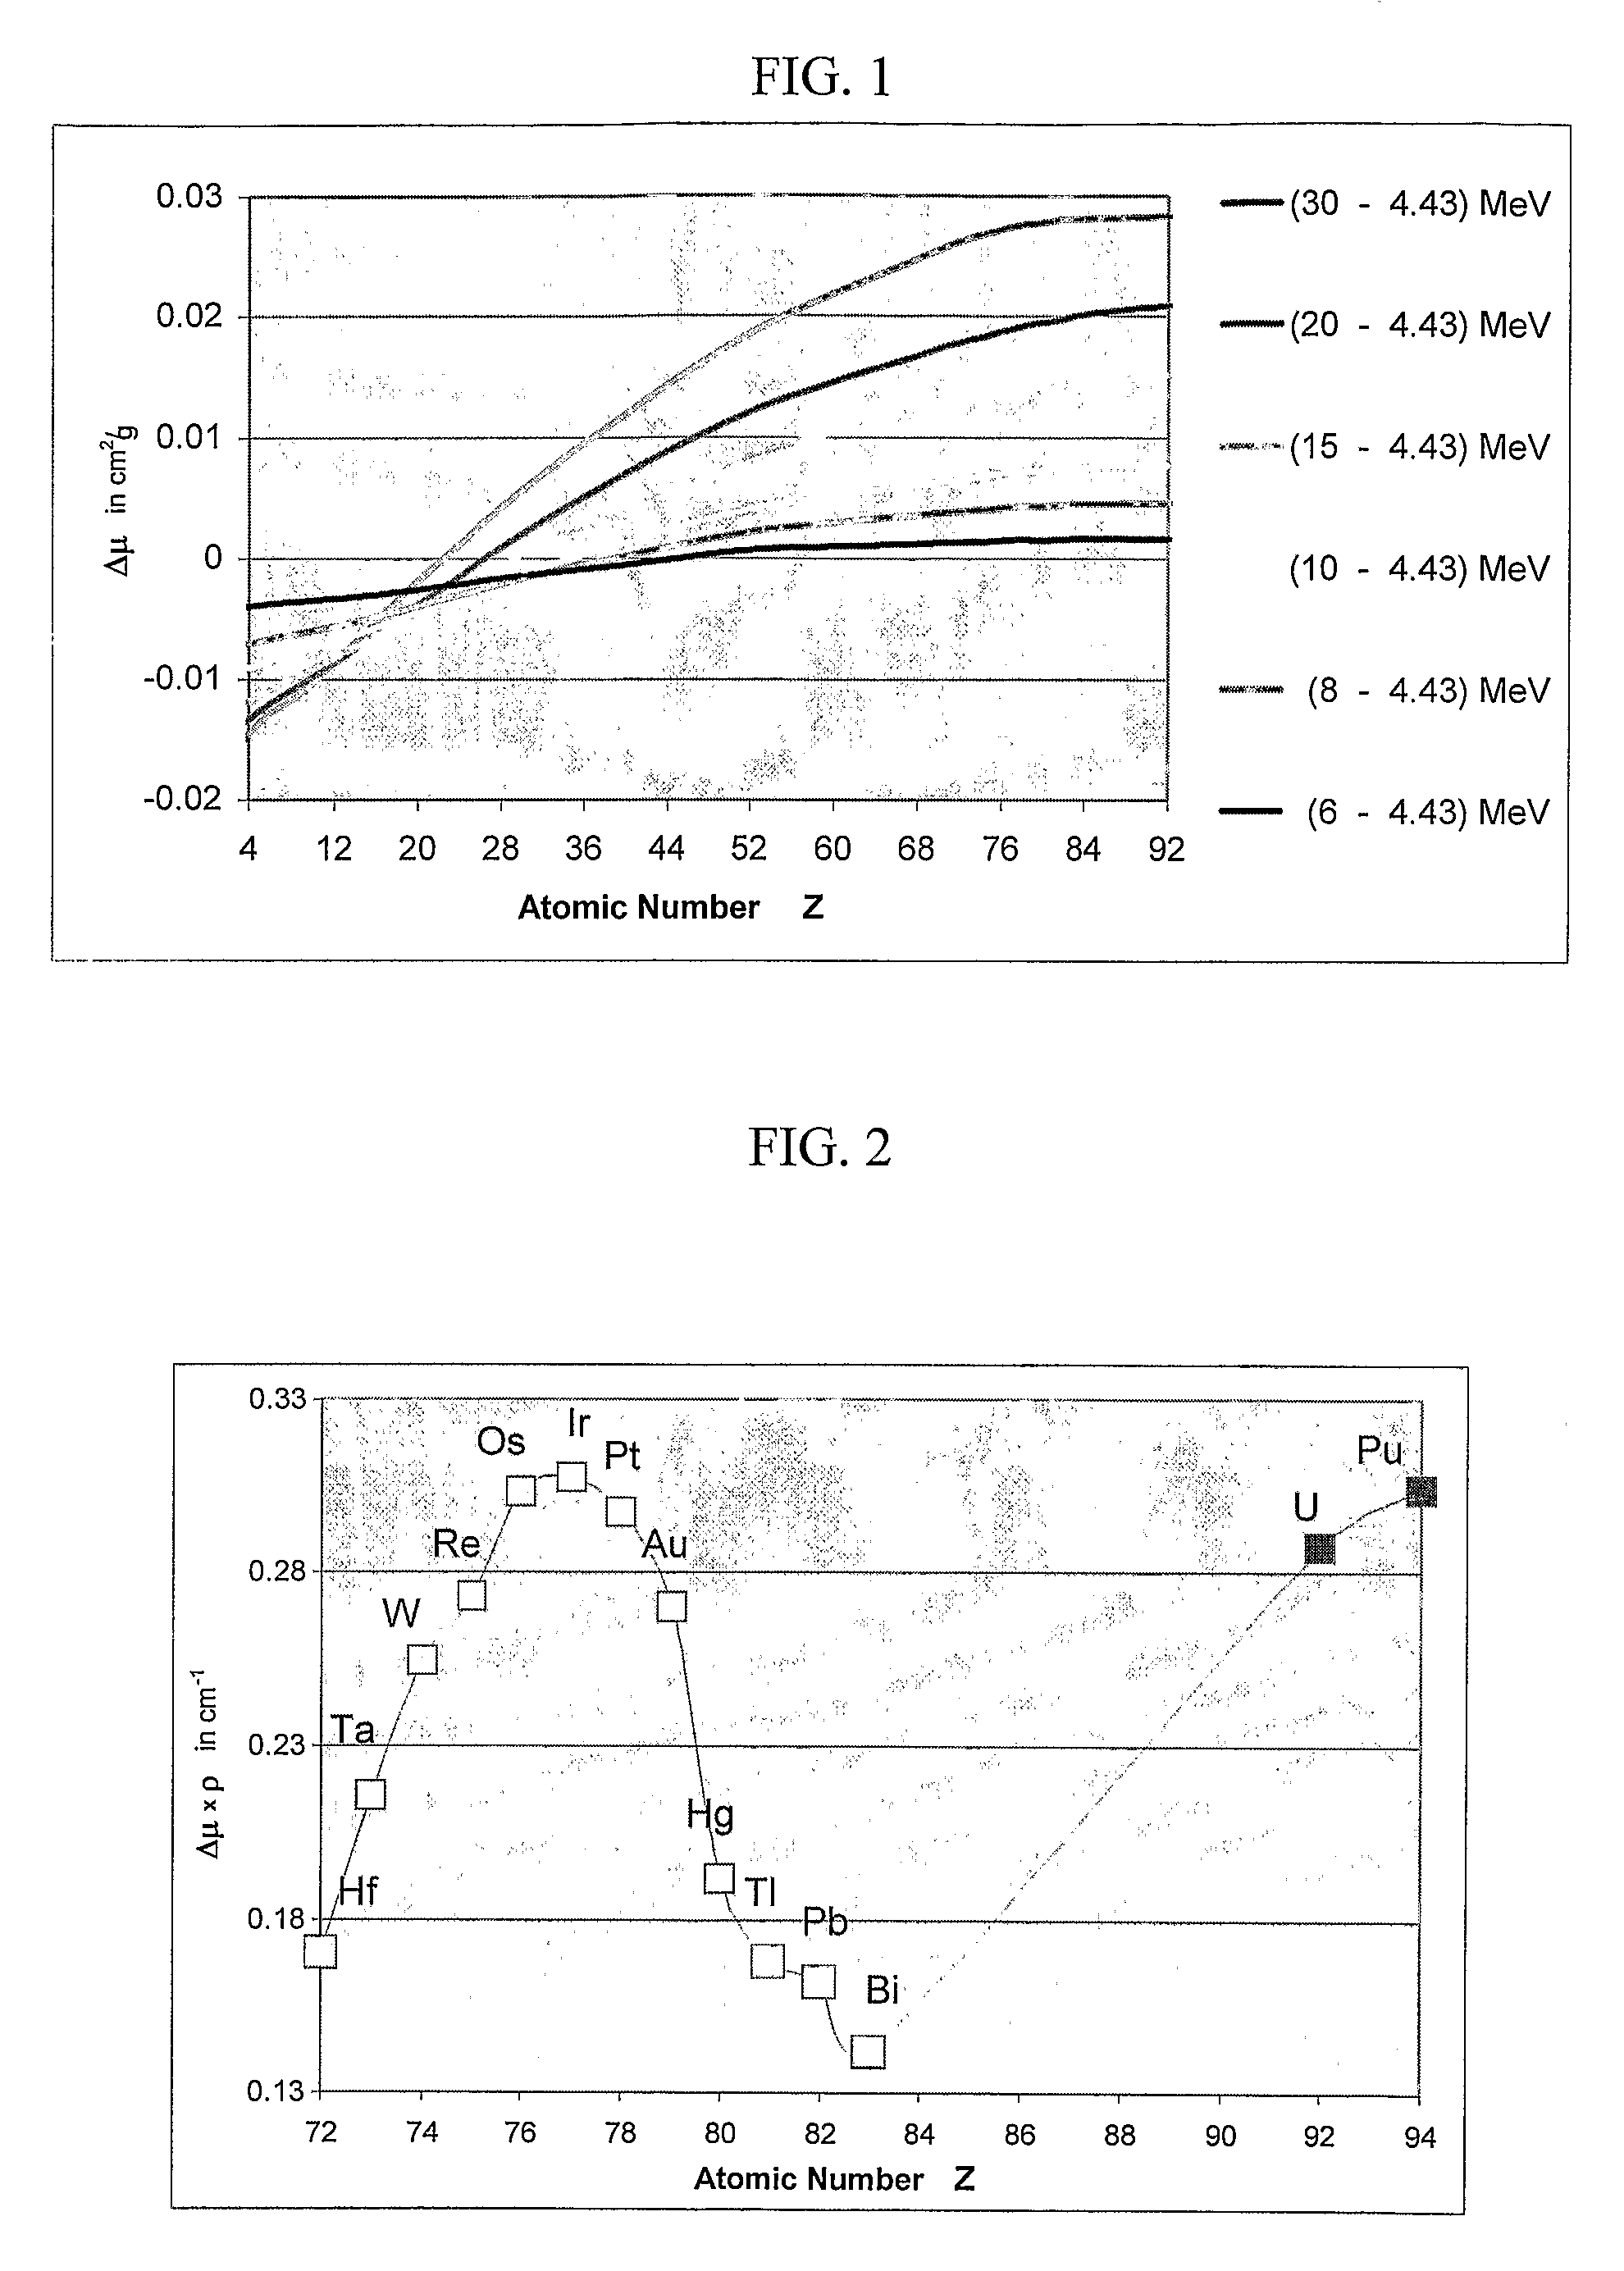 Method and system for detecting substances, such as special nuclear materials